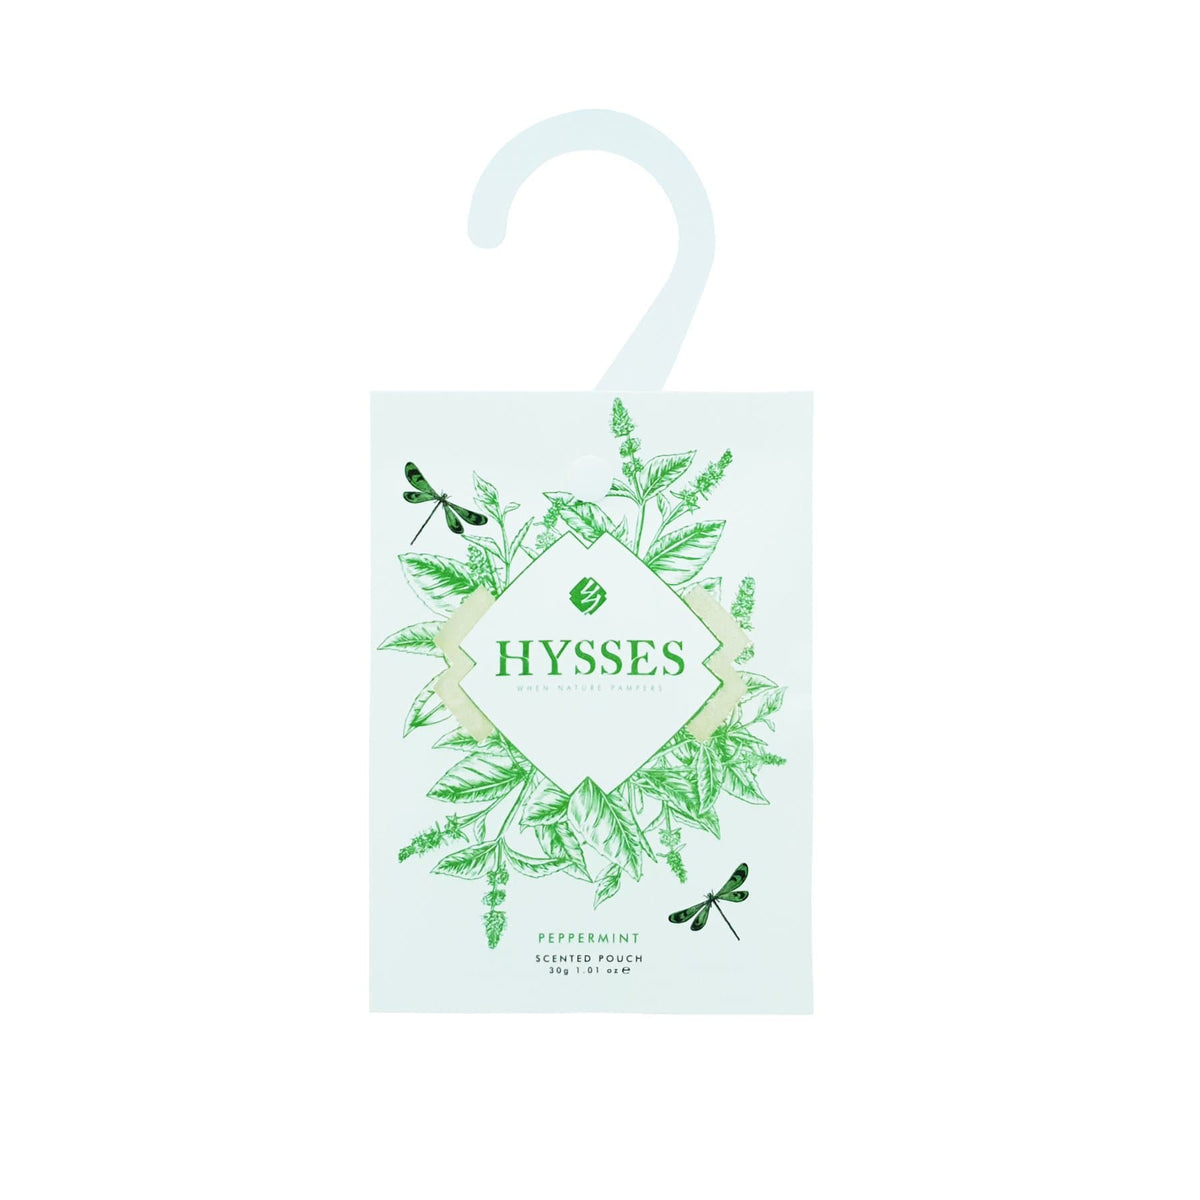 Hysses Home Scents Scented Pouch, Peppermint